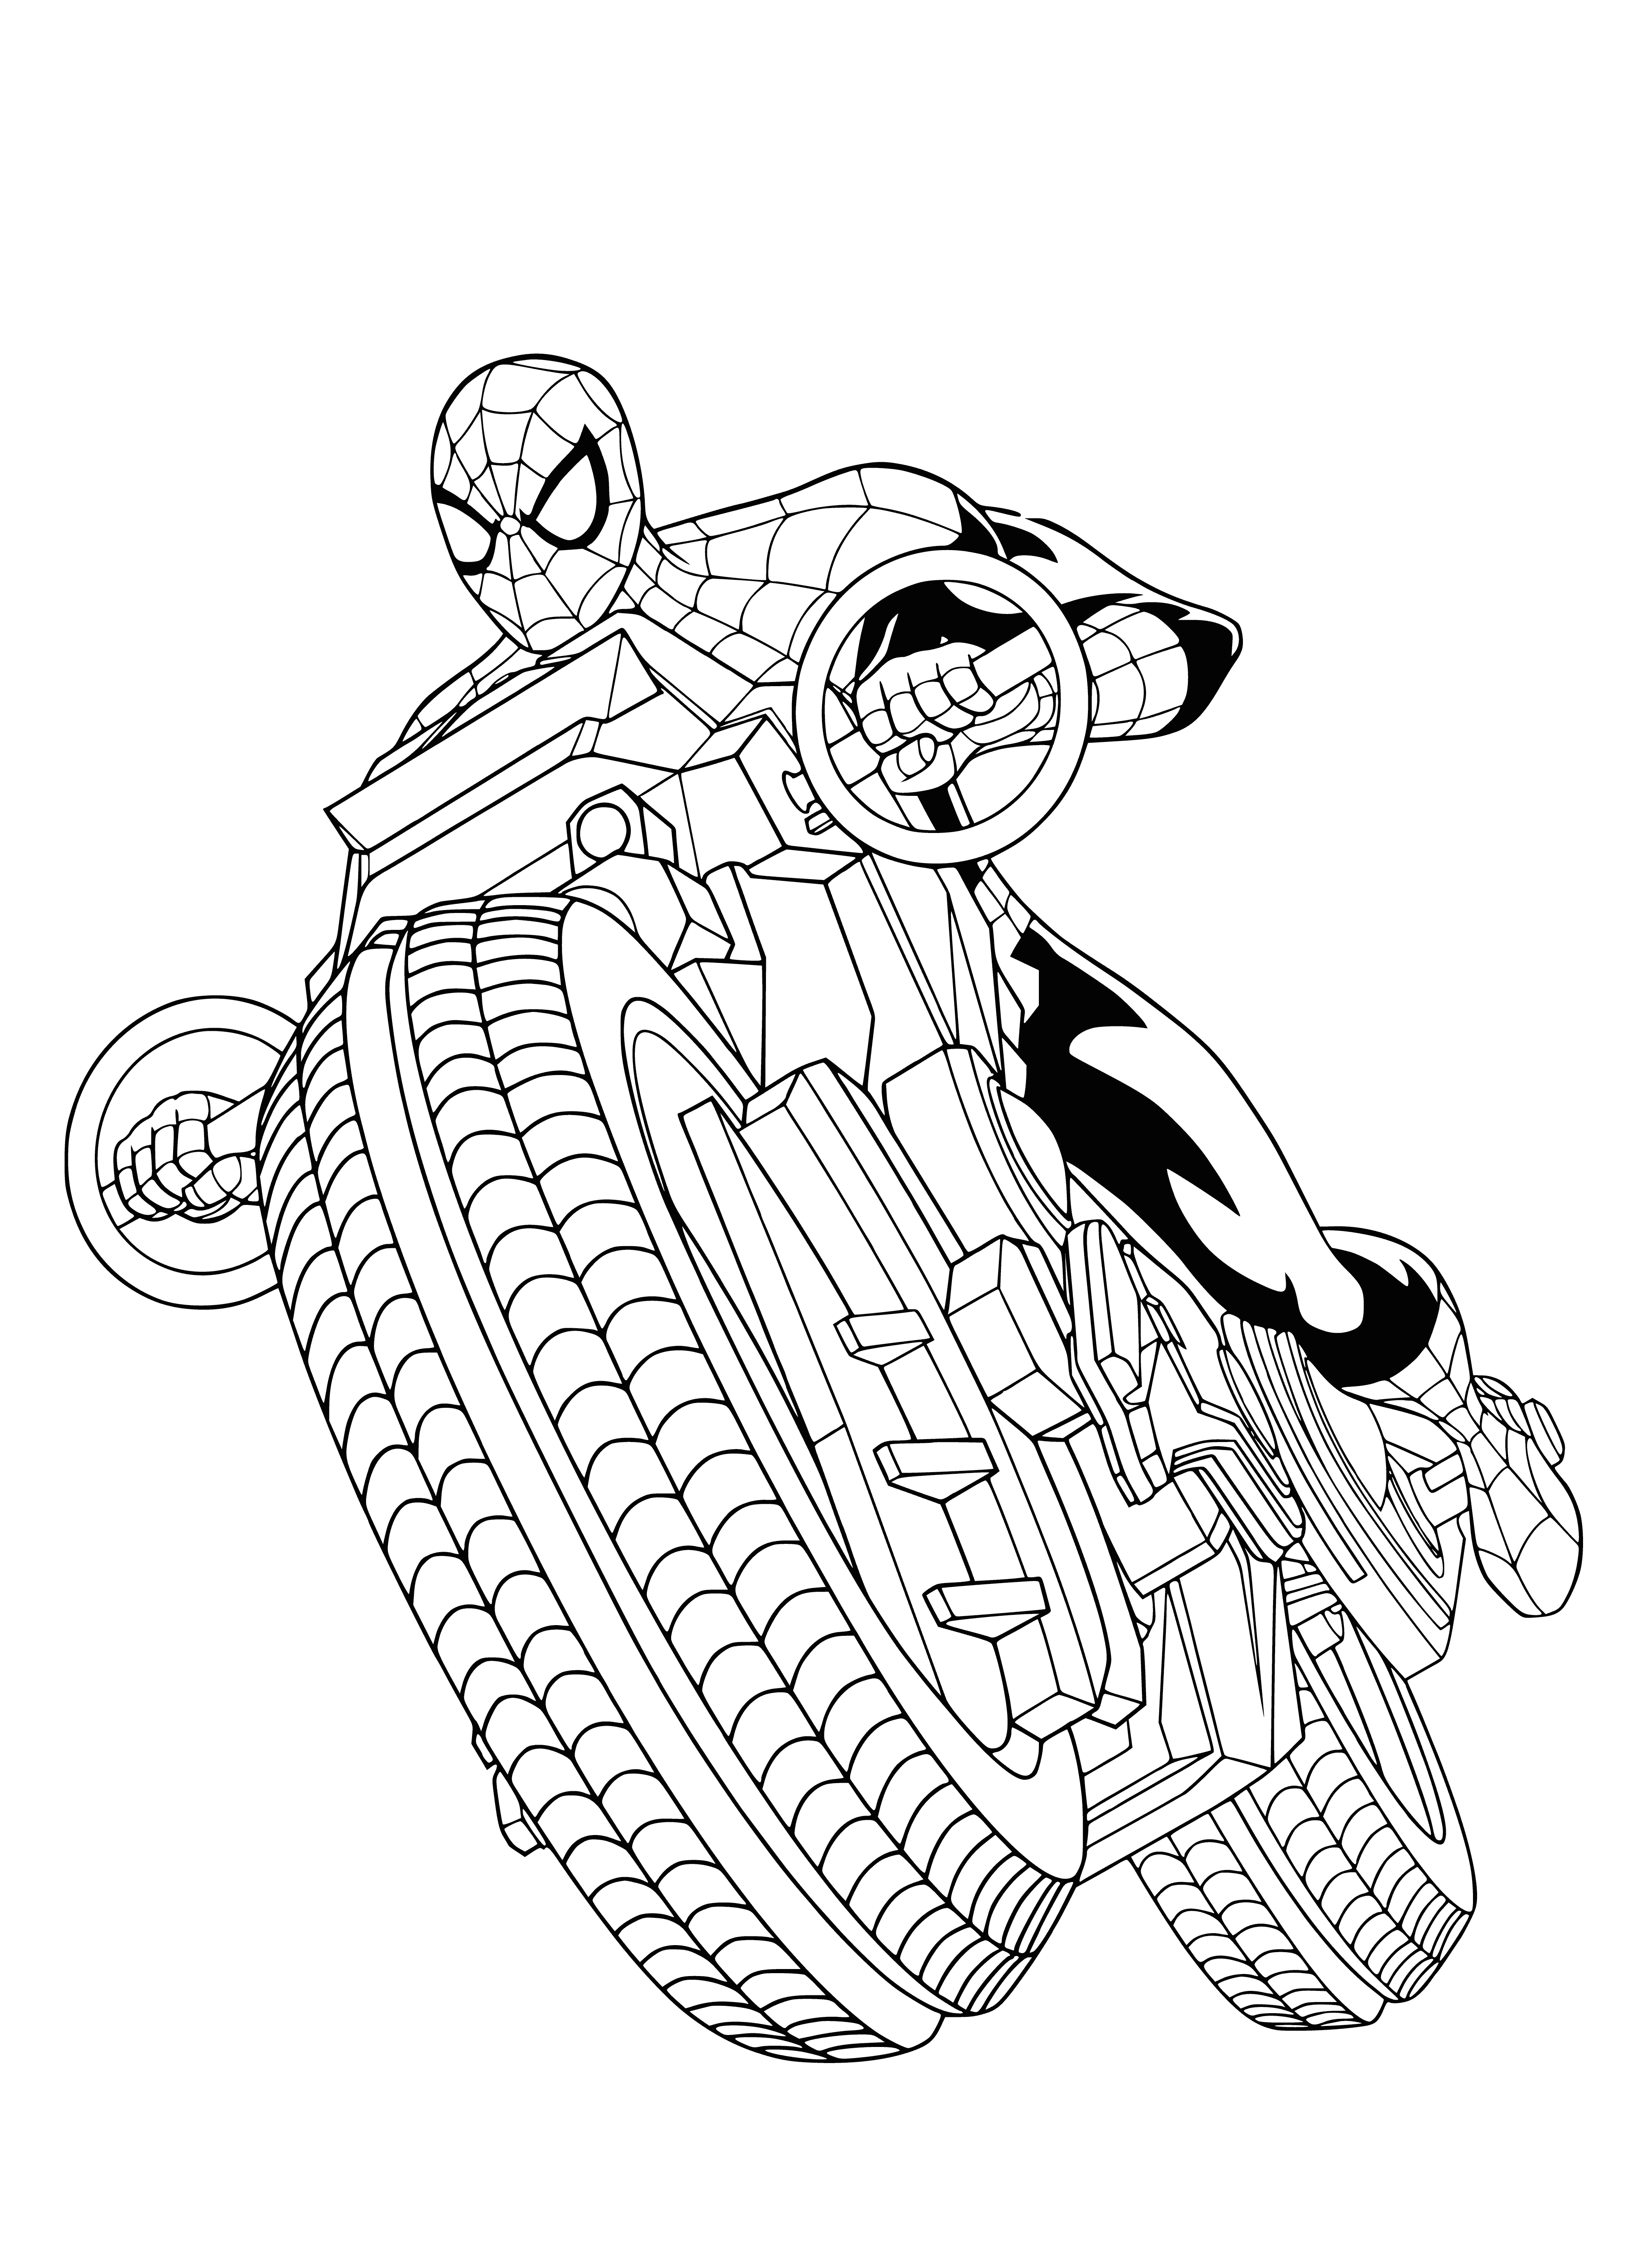 coloring page: Spiderman flies through air on motorcycle in red/blue costume, white eyes, cape. #butterflyeffect #superhero #action